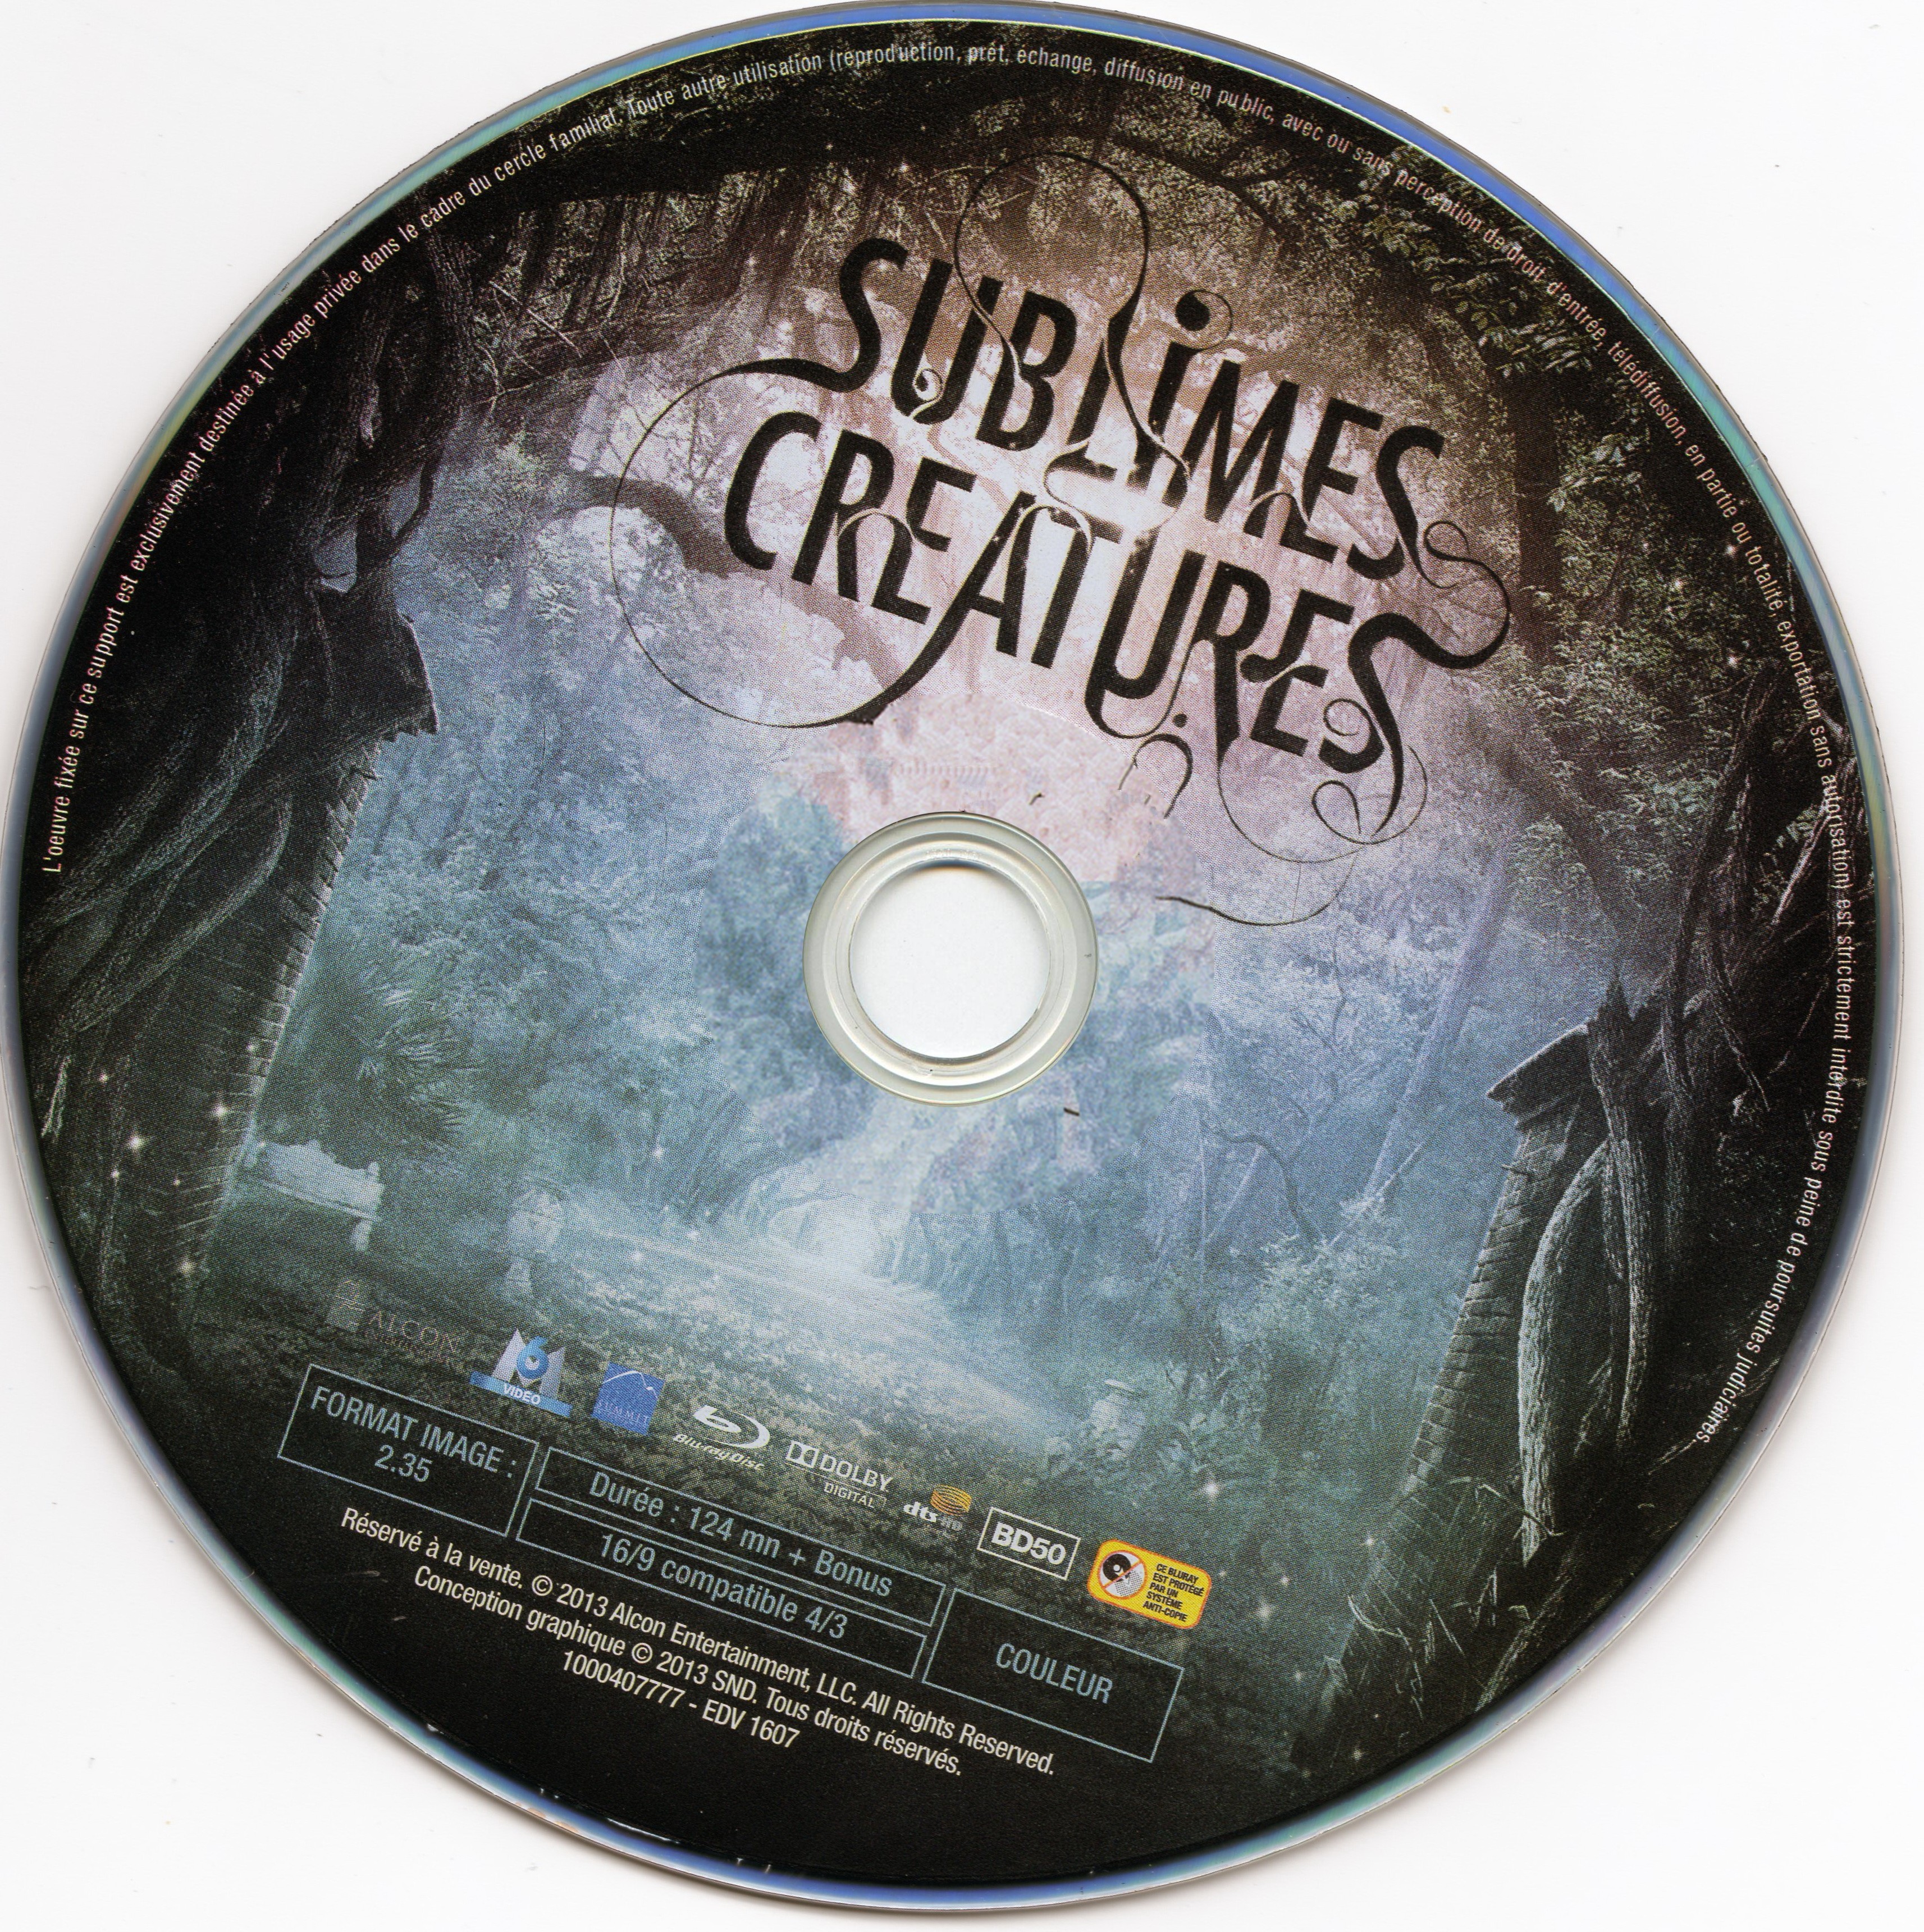 Sublimes cratures (BLU-RAY)